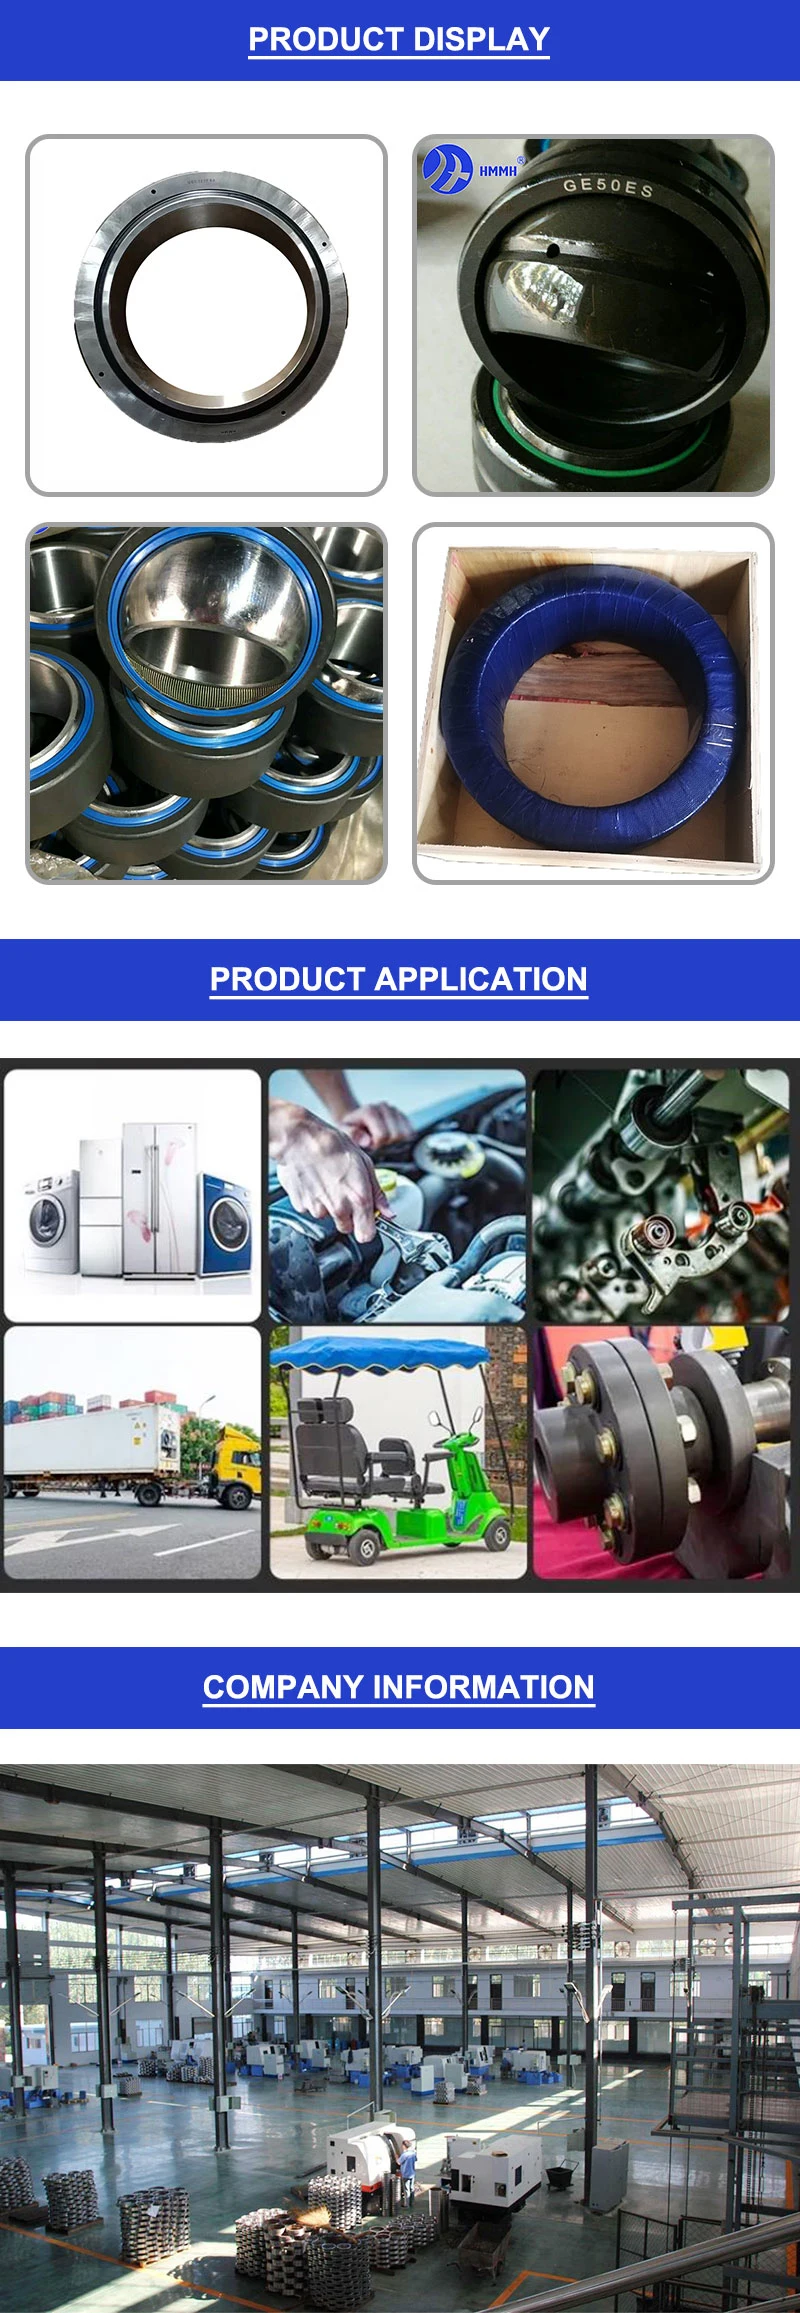 Bearing Steel and Spherical Plain Bearing with High Speed and More Precise Complete Models Applicable to Engineering Aerospace